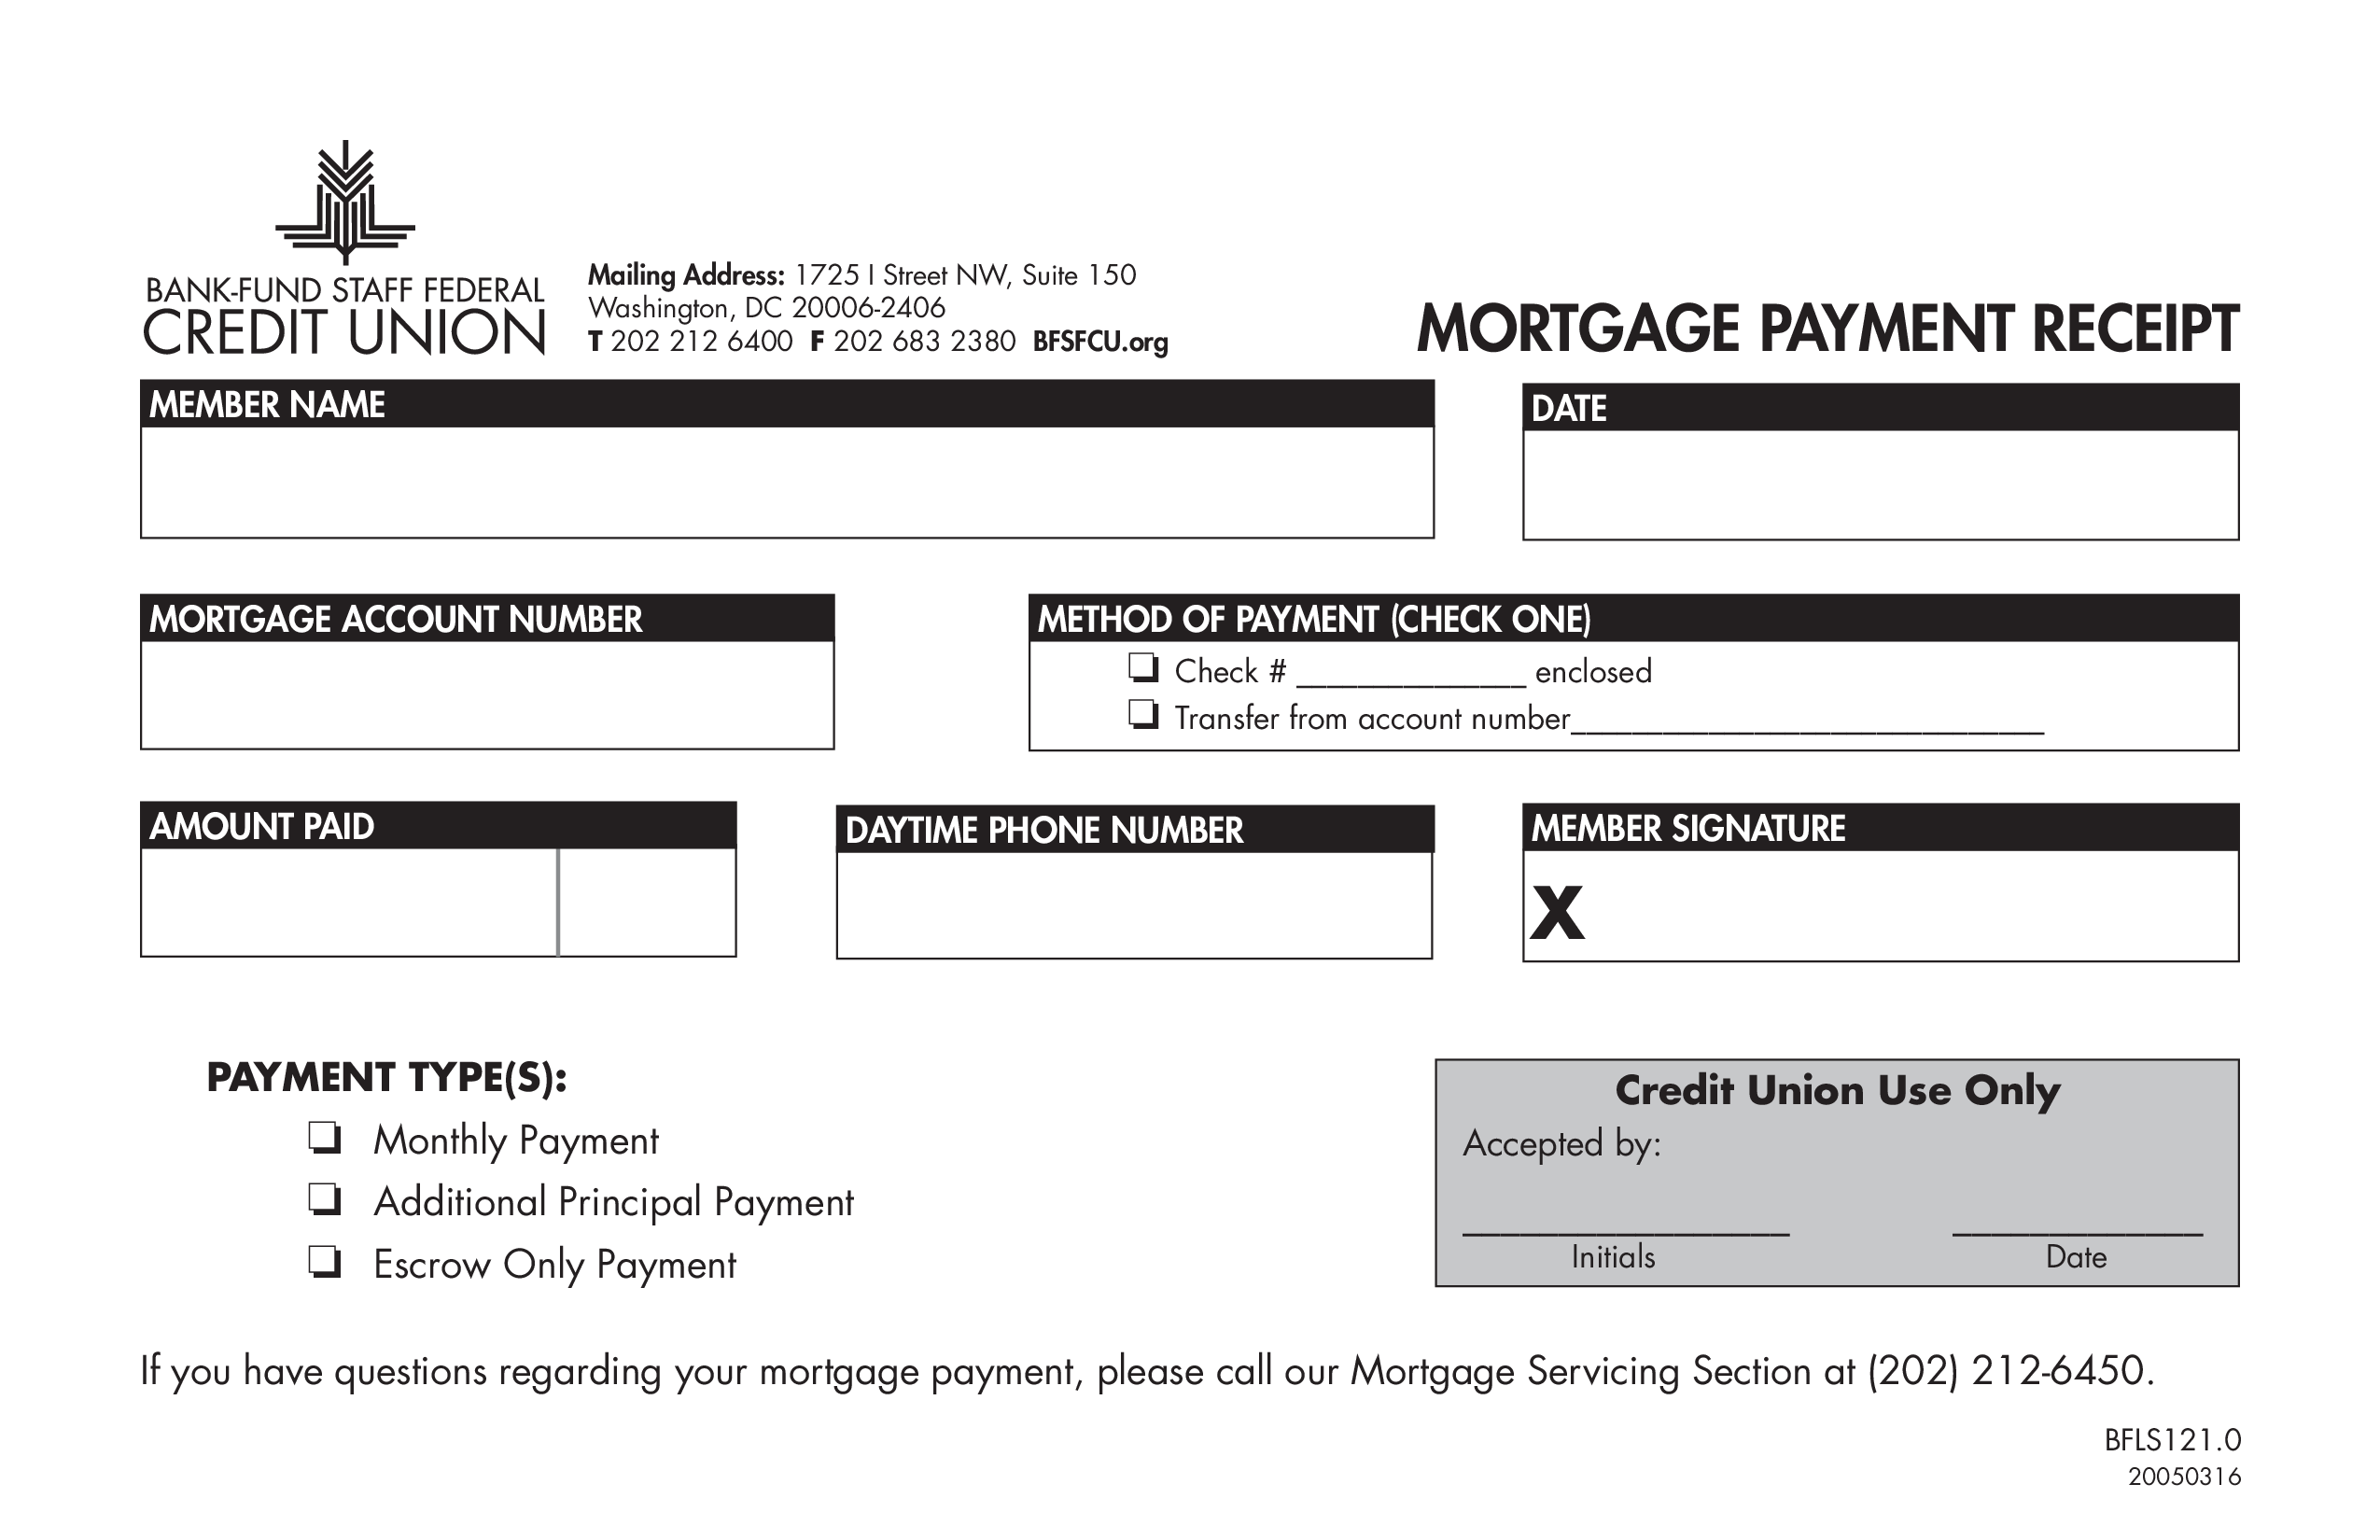 Mortgage Payment Receipt main image